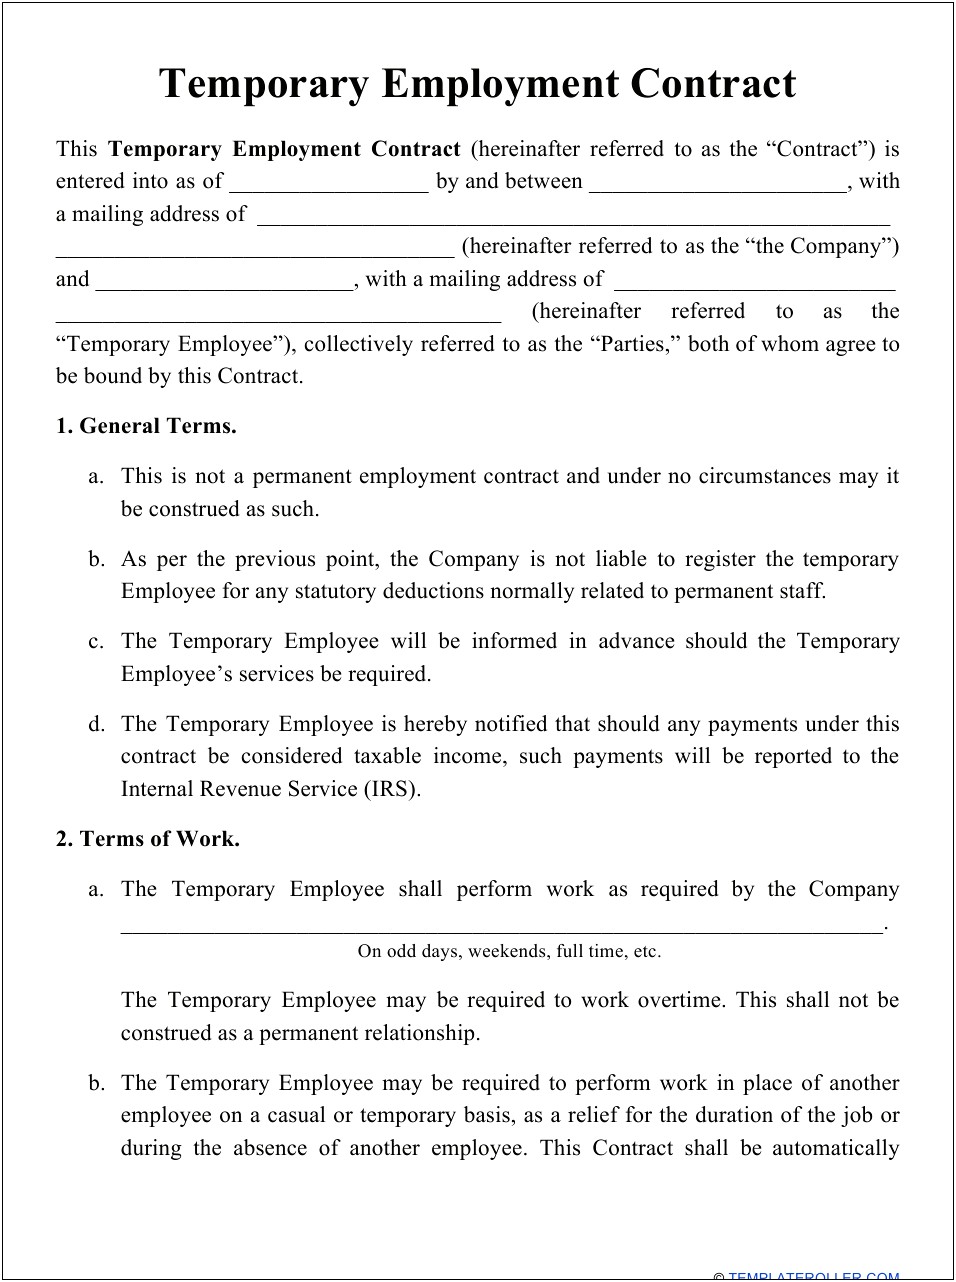 Sample Resumes With Temp Work